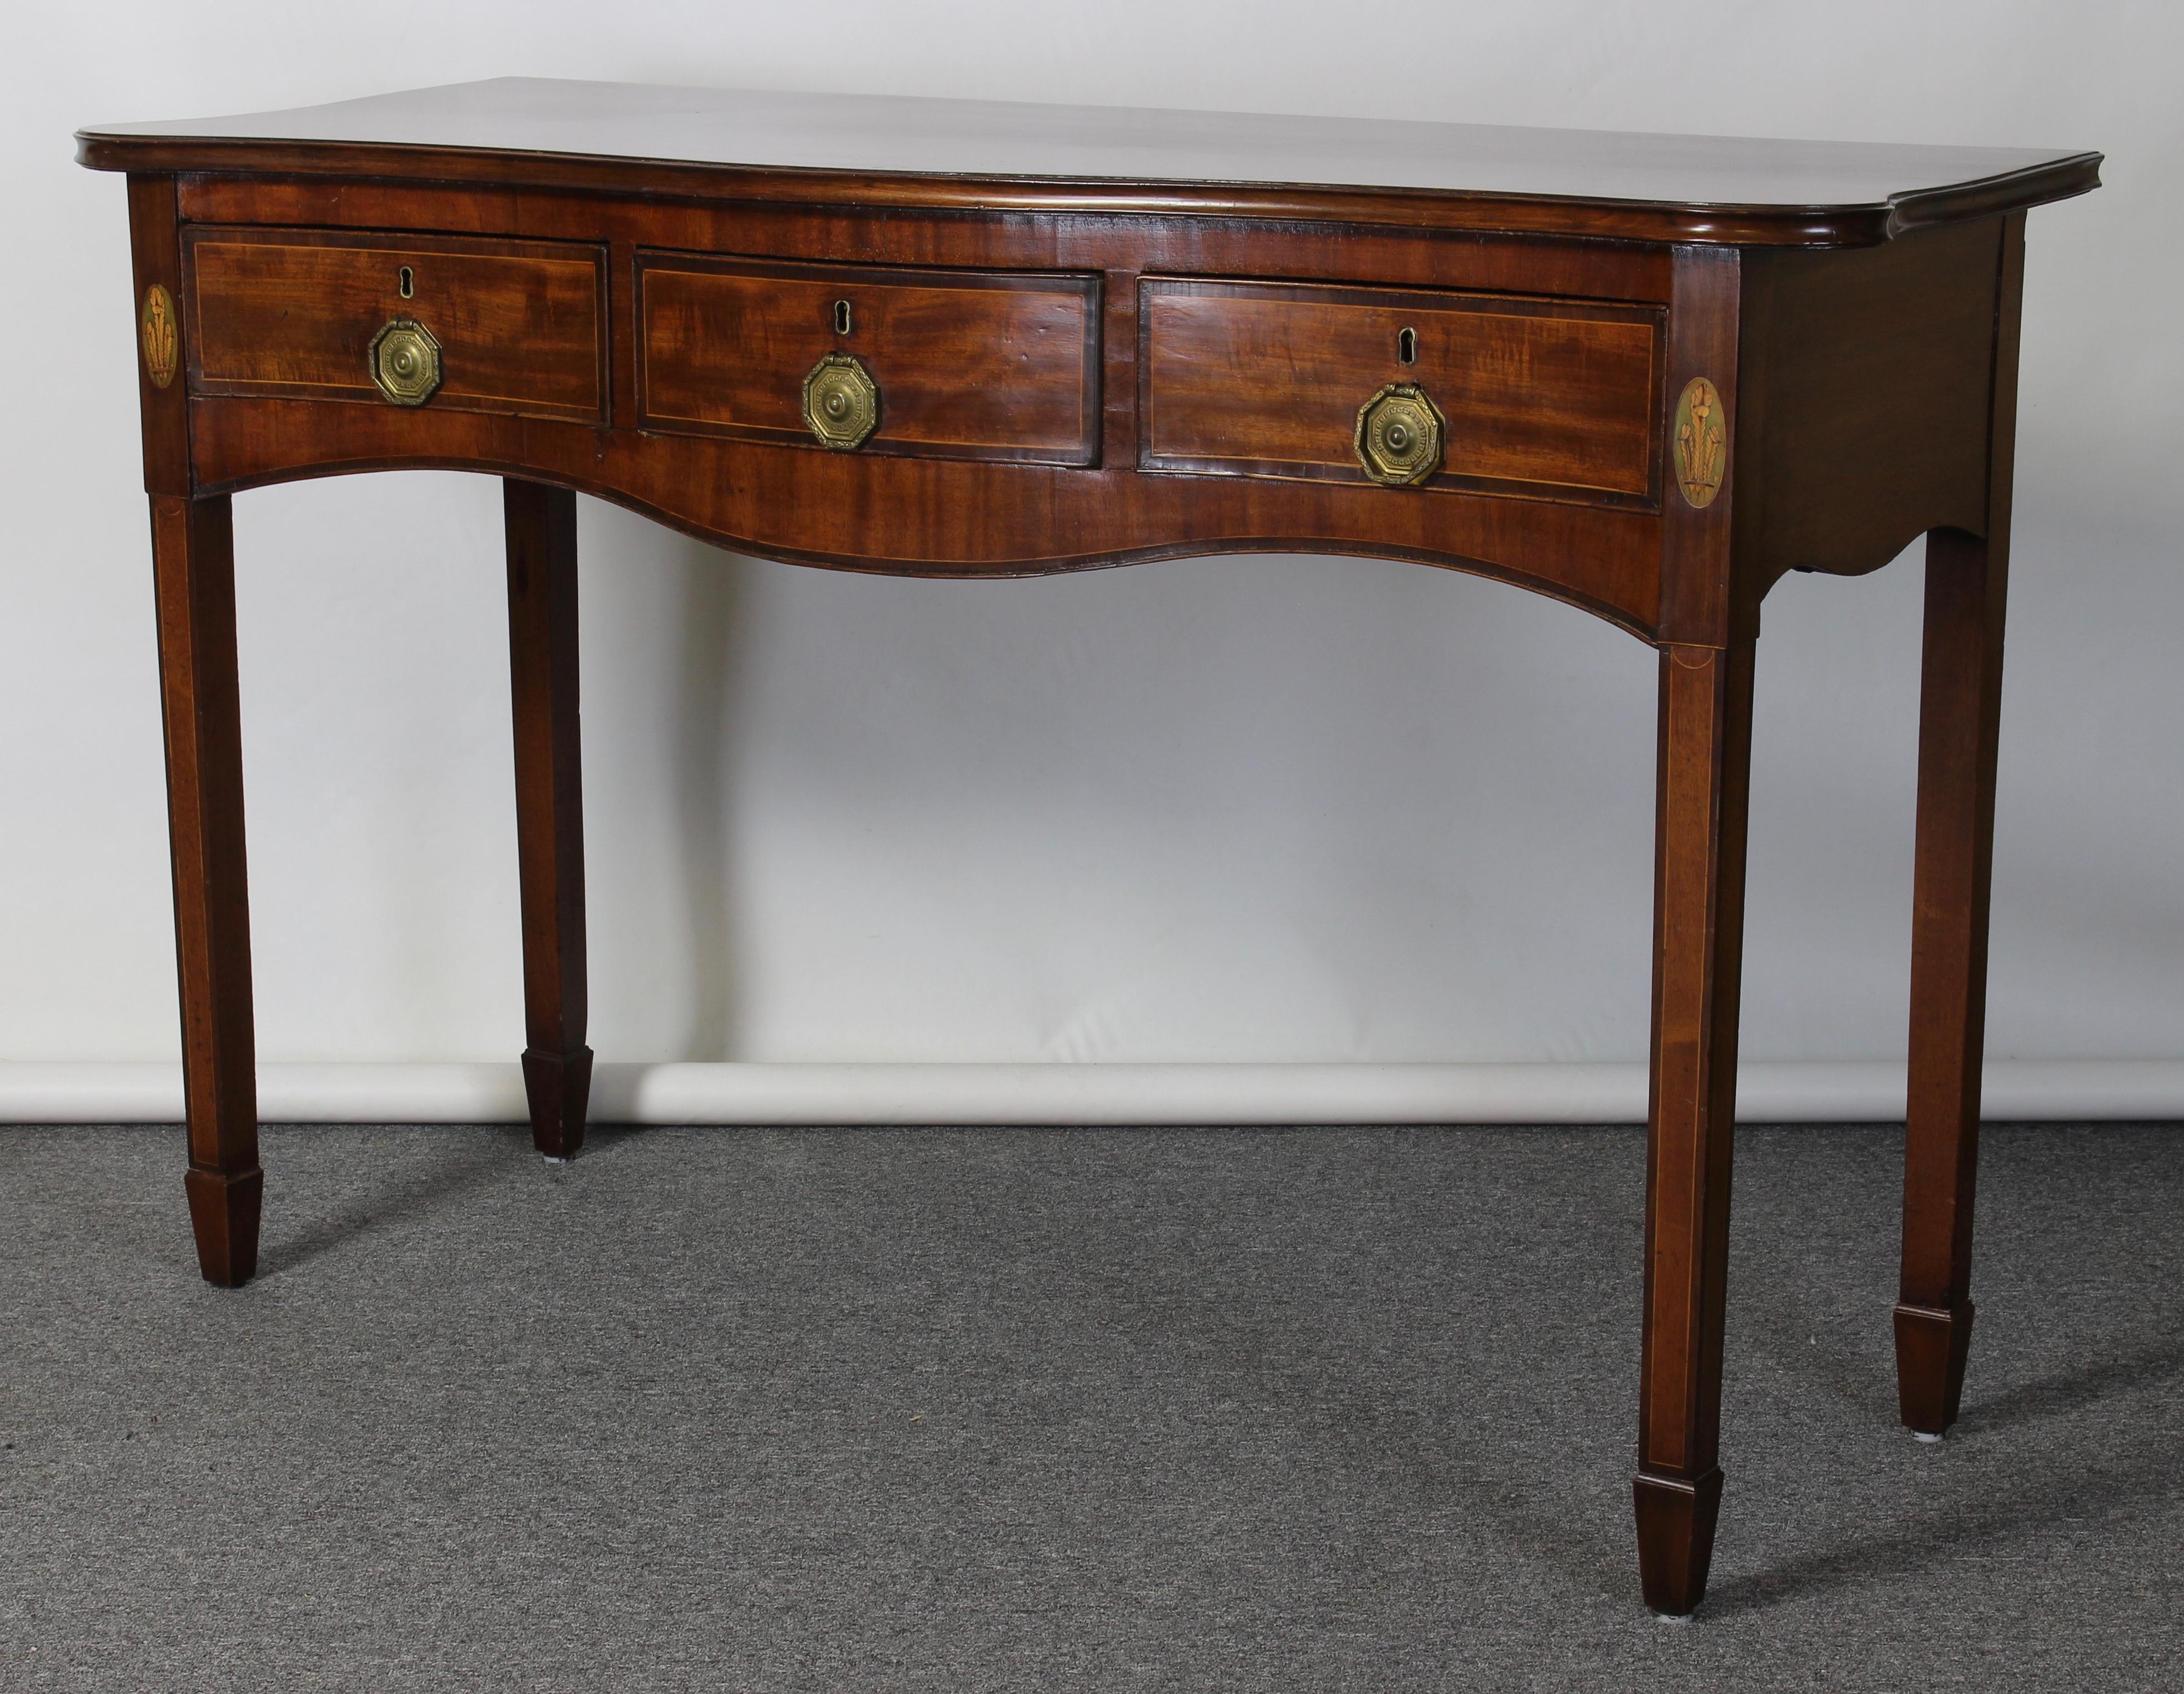 An elegant English George III mahogany serpentine top console table accented with intricate shell inlay and original pulls resting on Marlborough legs.